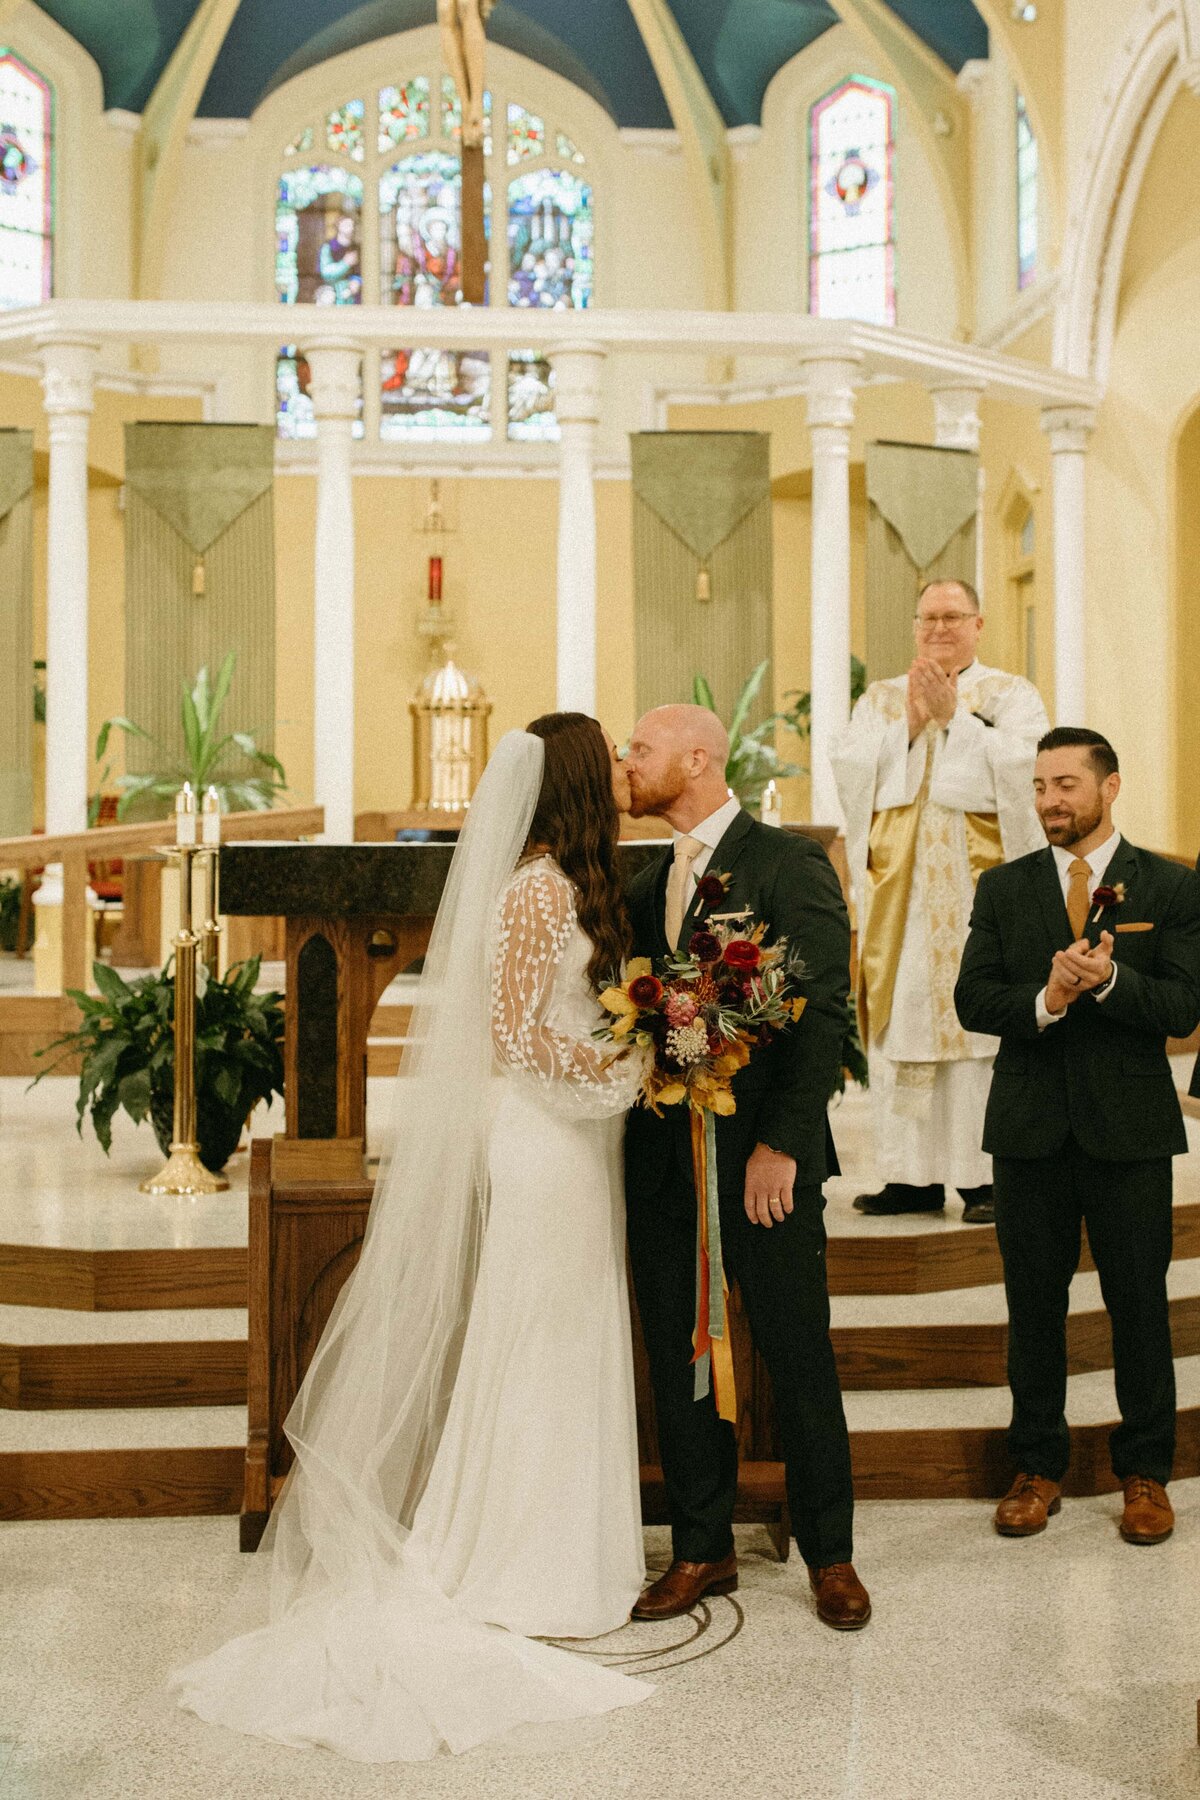 A bride and groom kiss at the altar of a church during their wedding ceremony, with a priest and a wedding coordinator watching in the background.